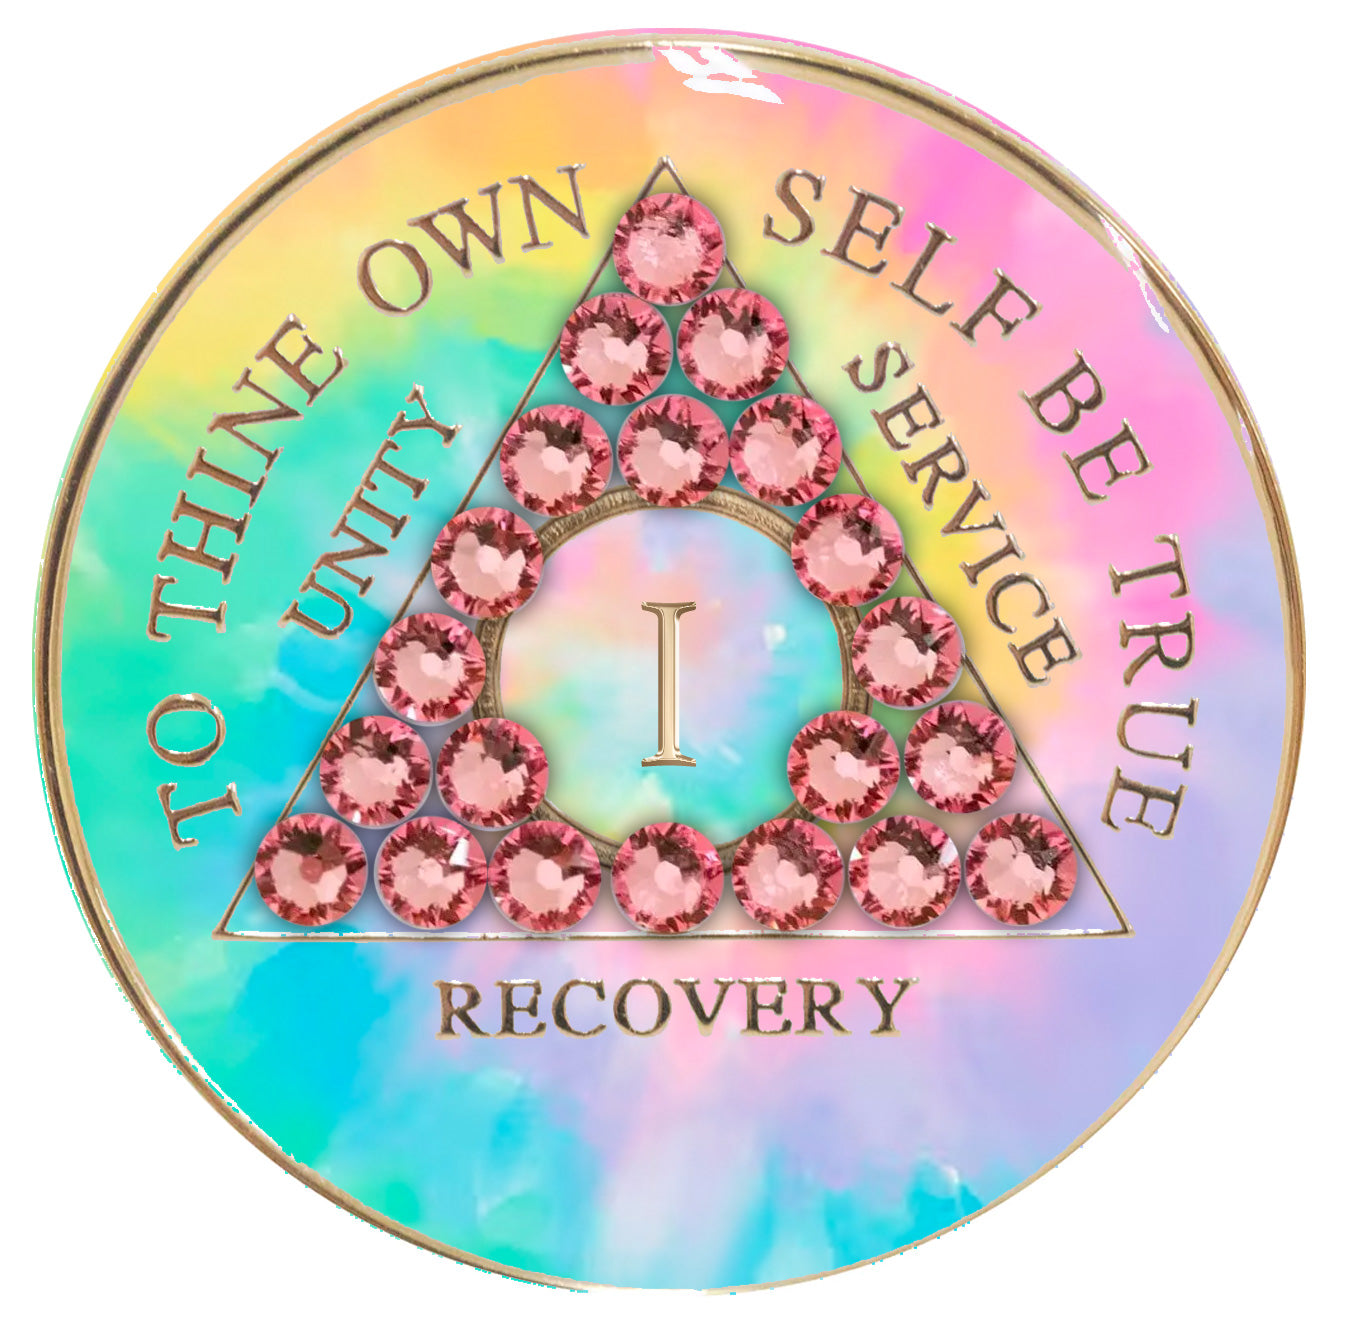 1 year AA medallion pastel tie-dye representing a psychic change that is needed in the recovery journey, with twenty-one light rose genuine crystals, pink, blue, yellow, and green, in the shape of the triangle, with the AA moto and roman numeral embossed in 14k gold-plated brass, the medallion is sealed with resin for a glossy, scratch free finish.